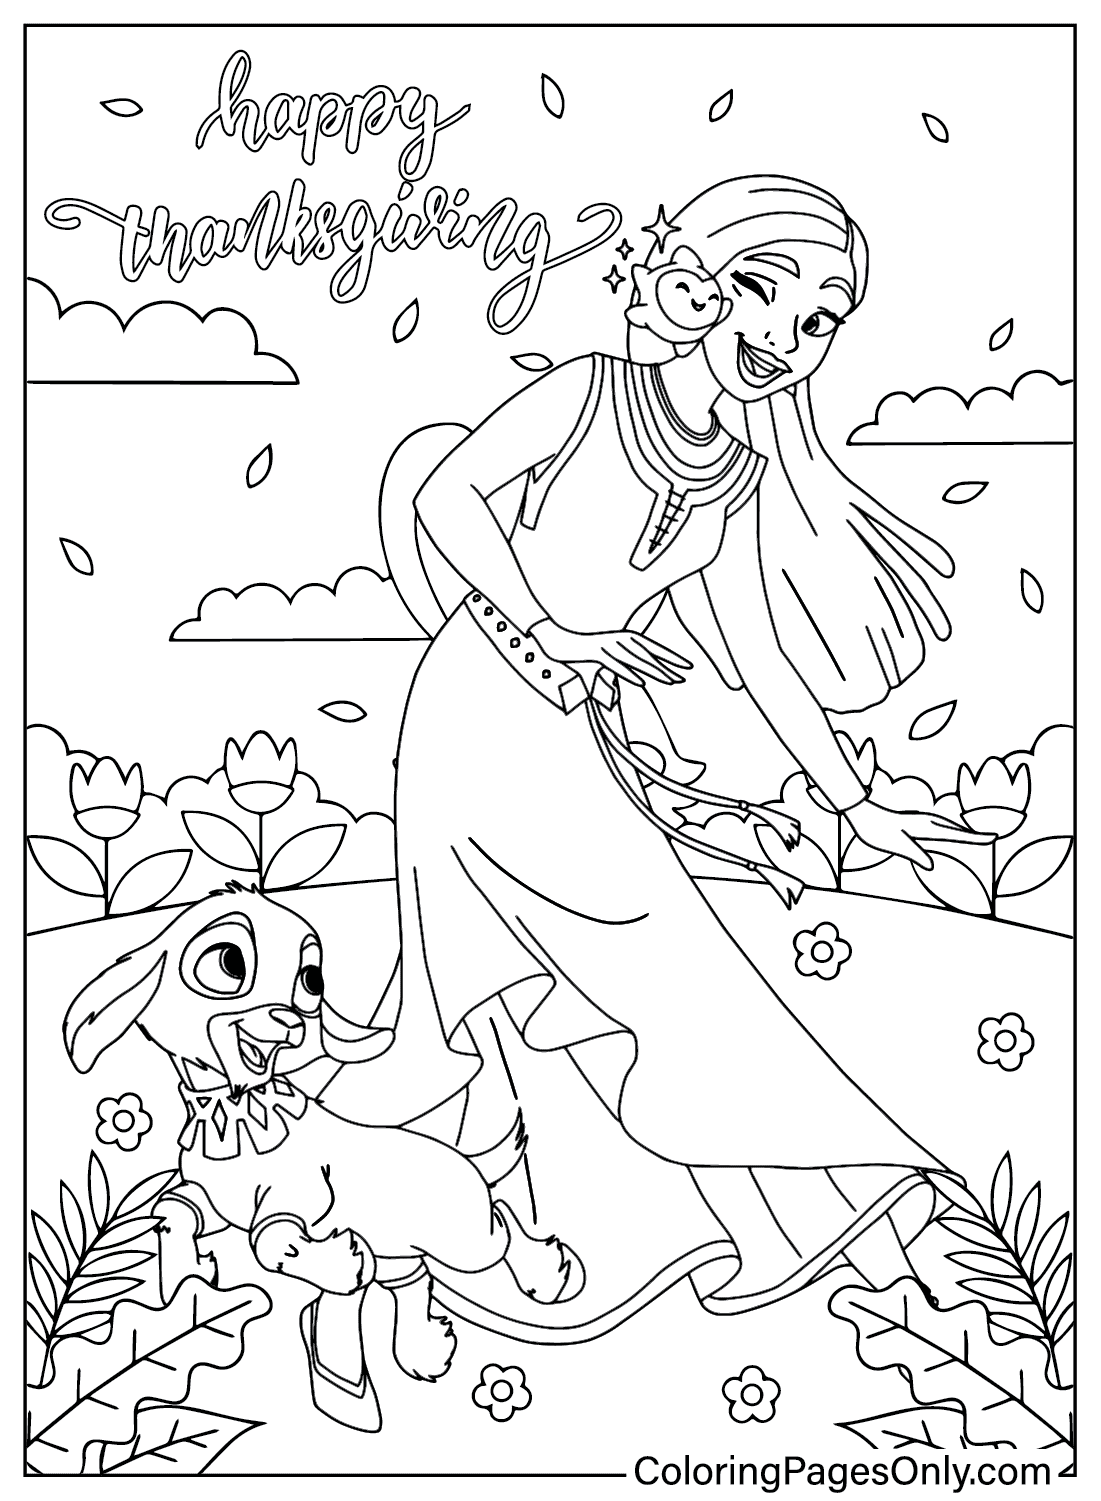 Wish Disney Thanksgiving Coloring Pages from Disney Thanksgiving